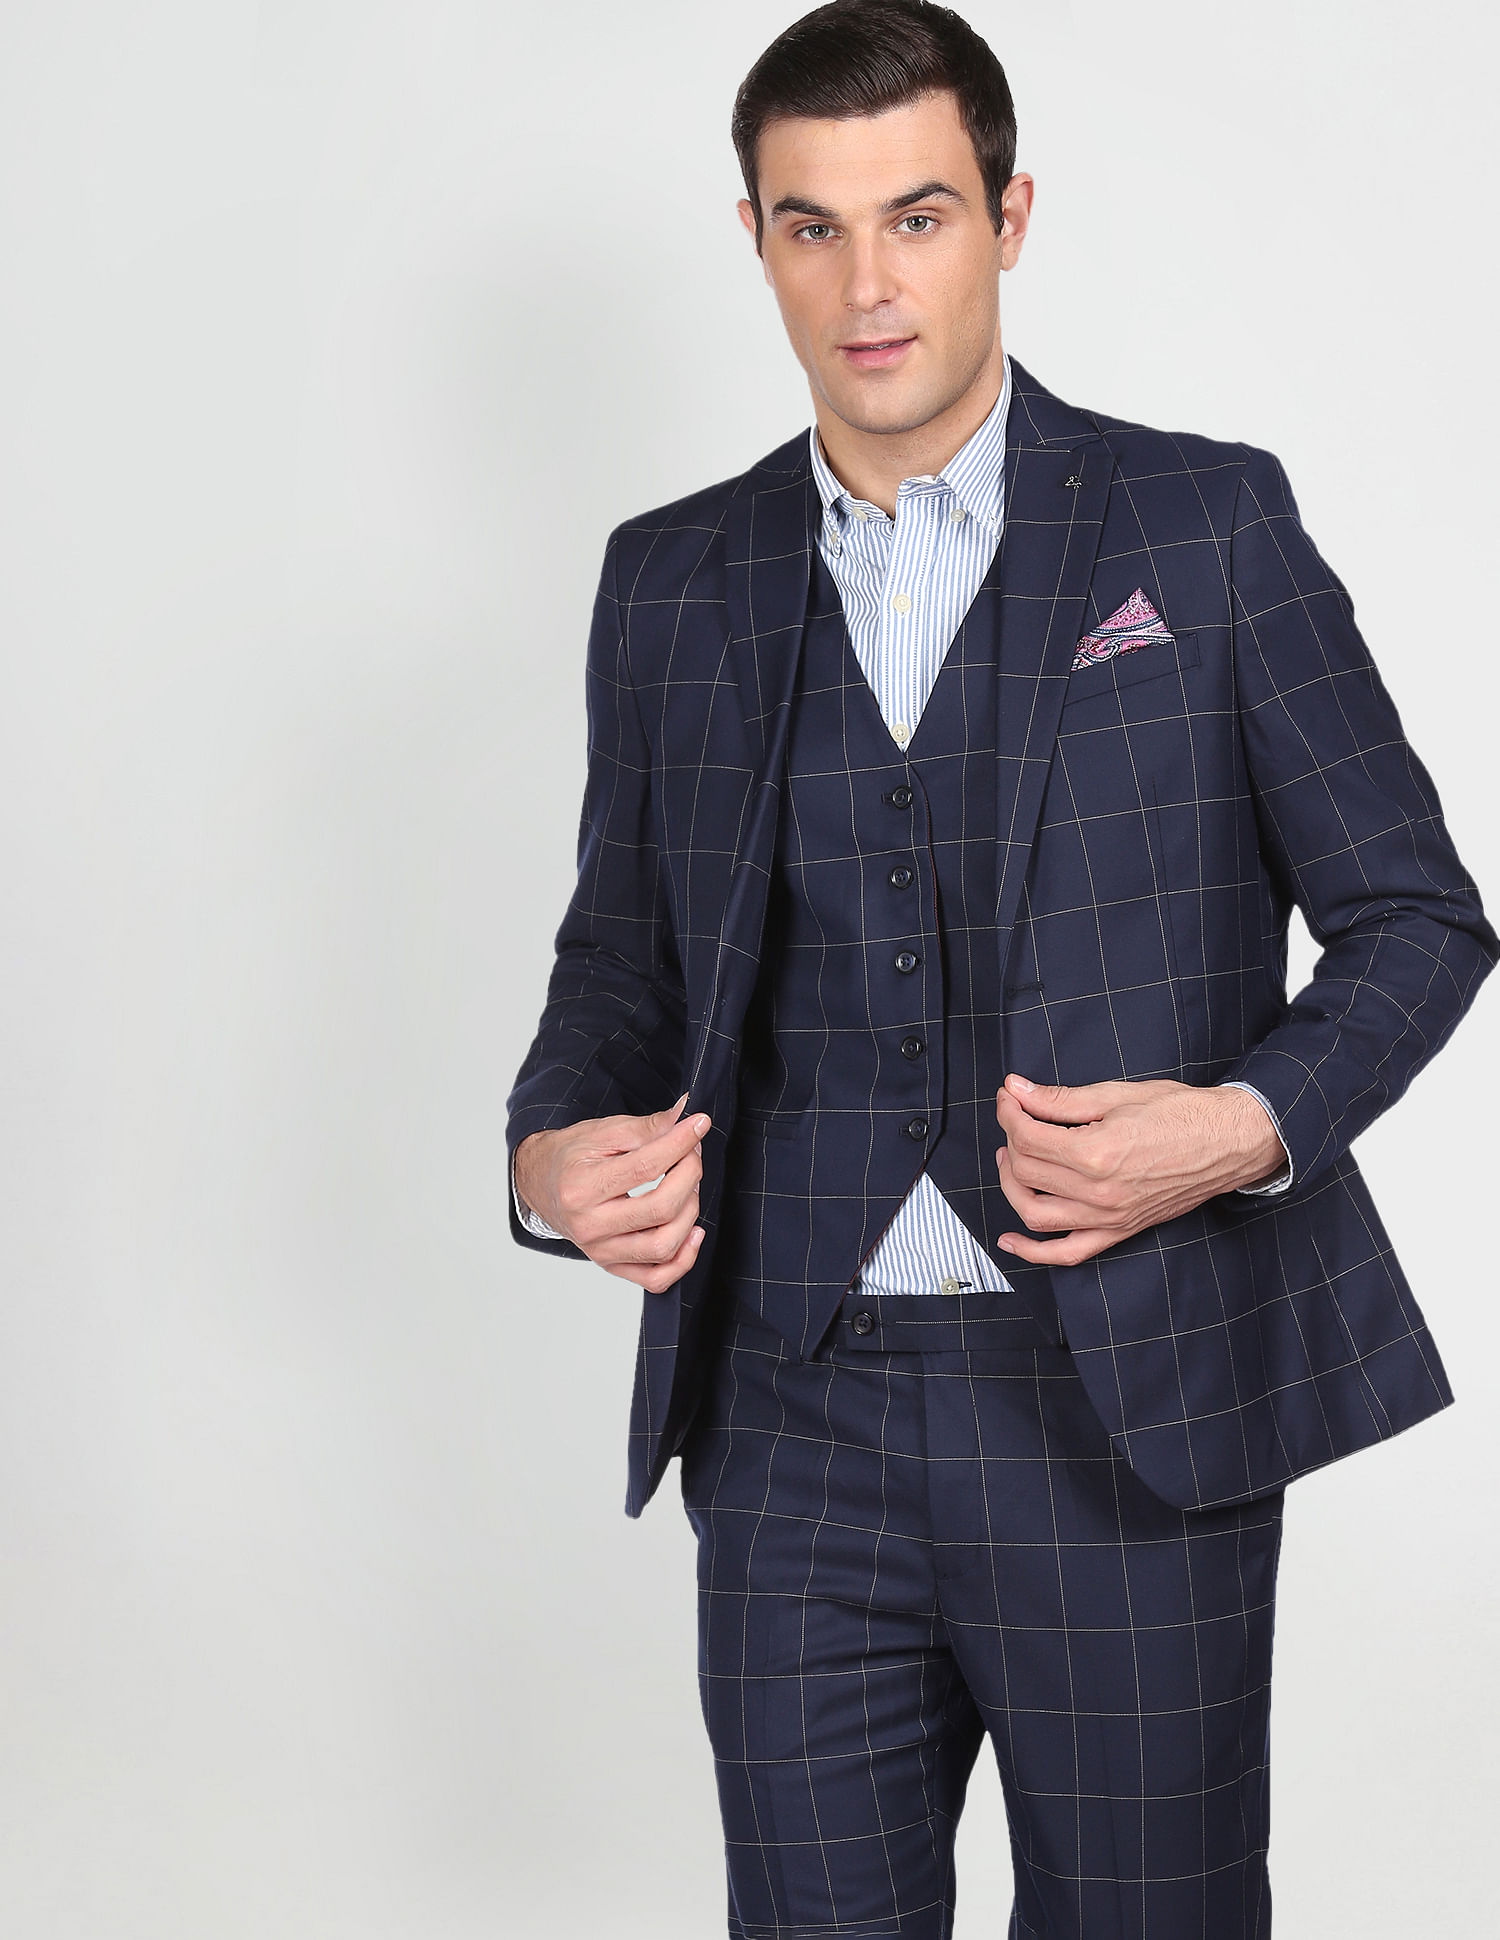 Buy Mens Check 3 Piece Formal Wedding Business Office Grey Suit Set Online  in India - Etsy